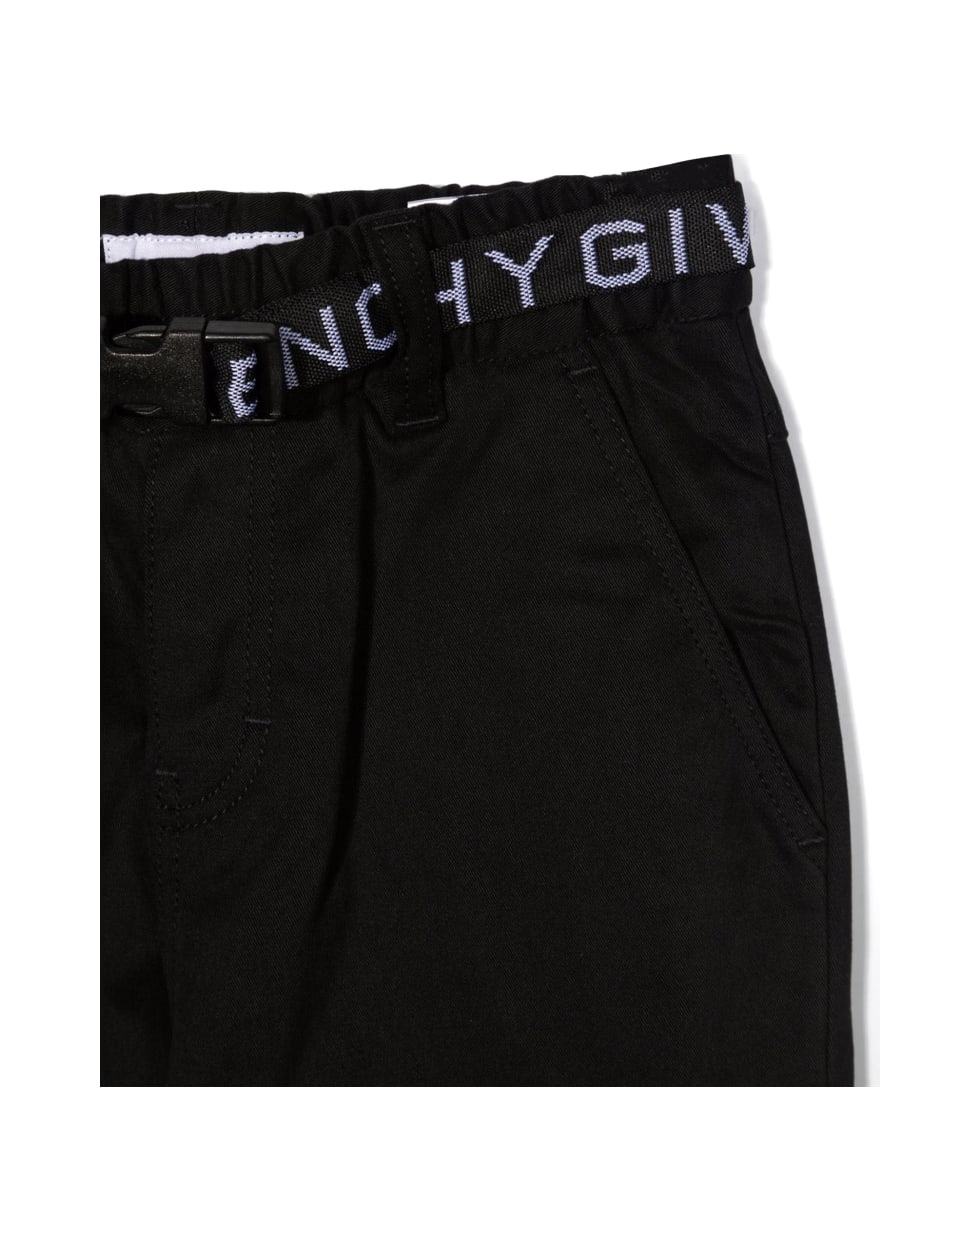 Givenchy Black Cotton Trousers - Nero